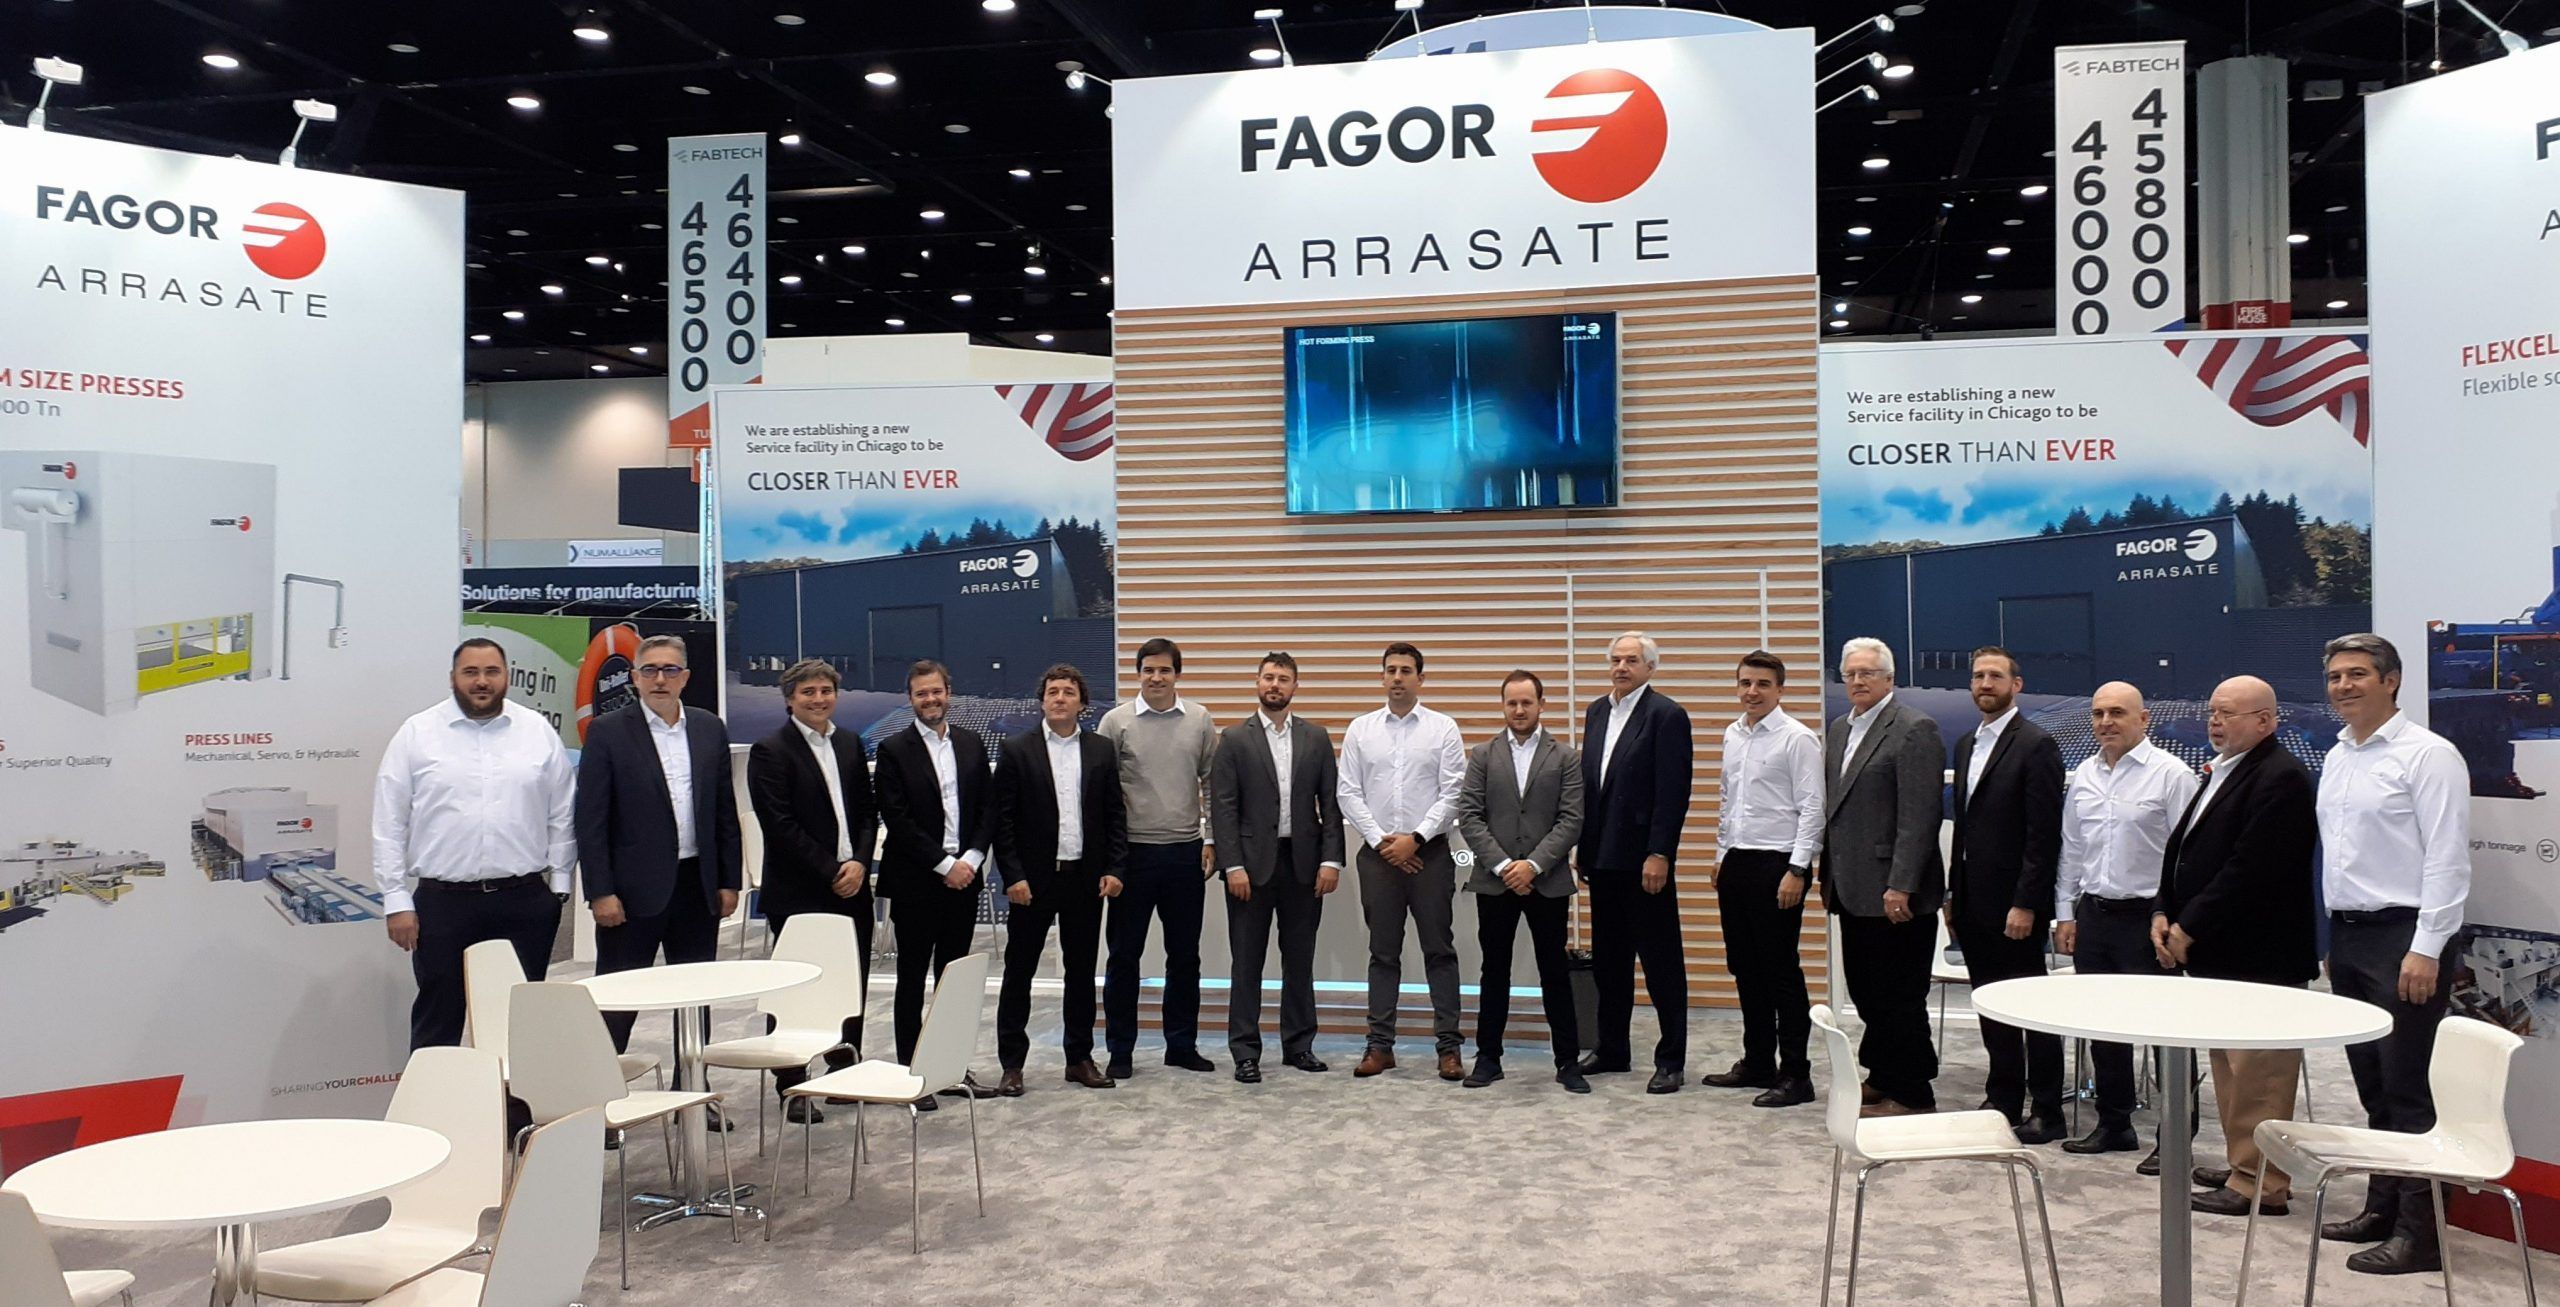 Fagor Arrasate event: Fagor Arrasate announces at Fabtech the opening of a new service-oriented plant in Chicago metro area